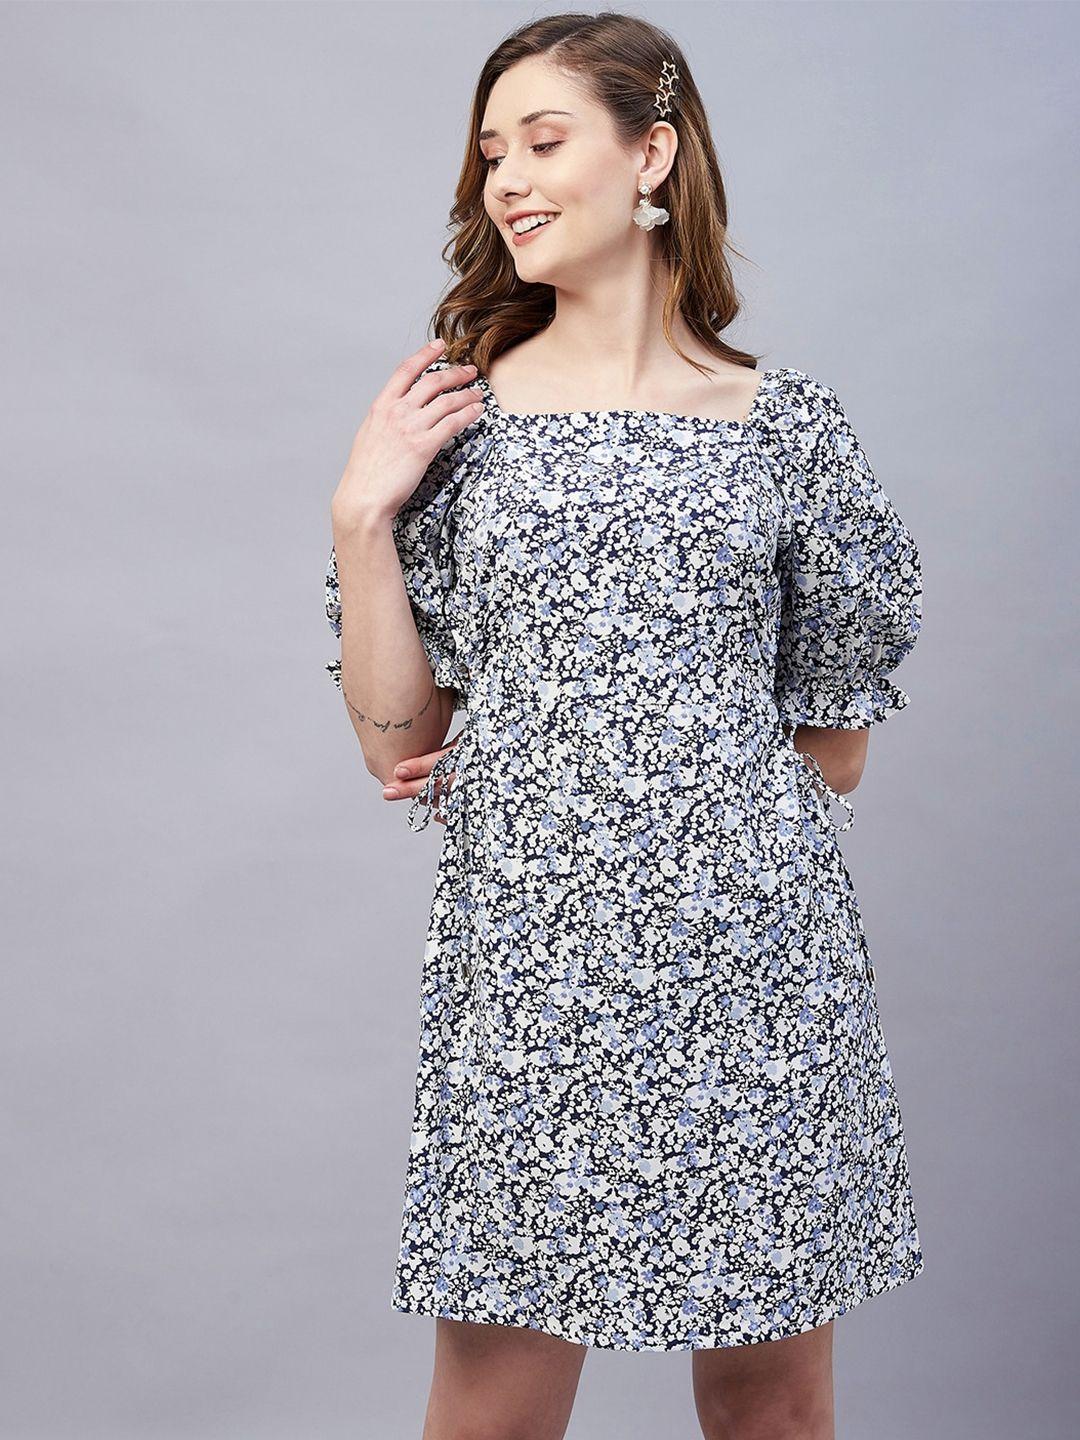 marie claire black floral printed puff sleeves georgette a-line dress